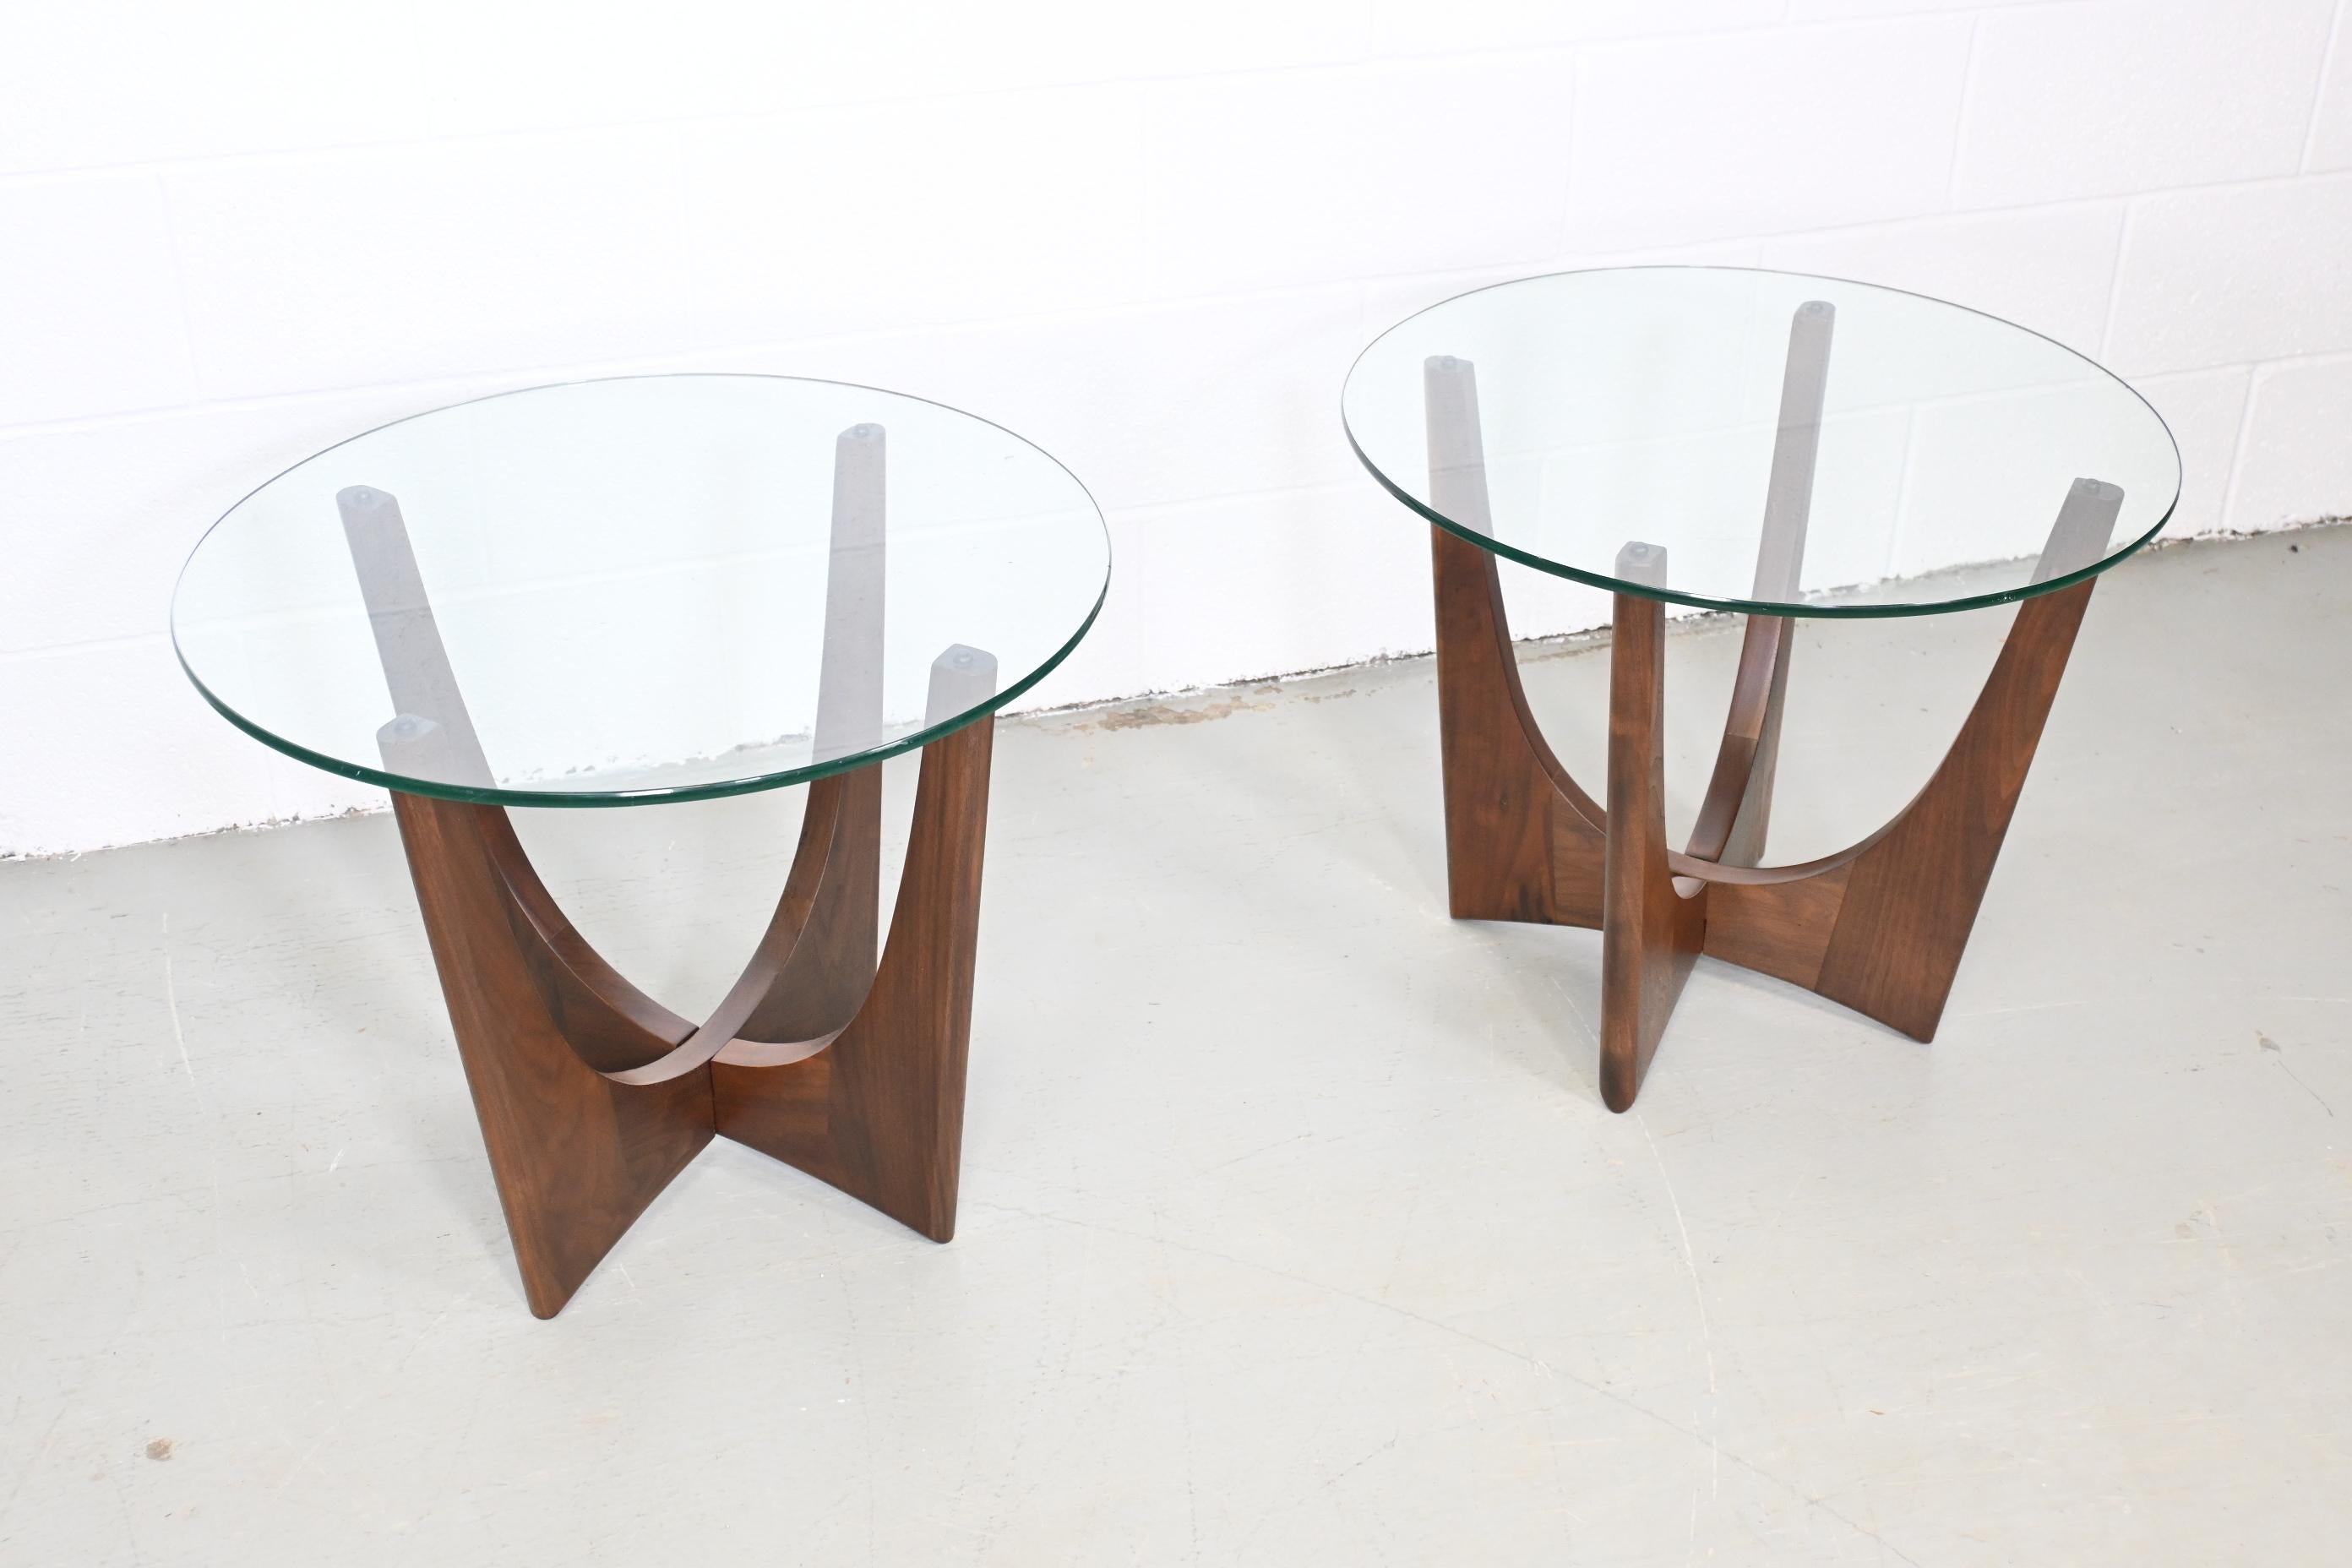 Lacquered Adrian Pearsall Style Walnut and Glass Mid Century Modern Side or End Tables